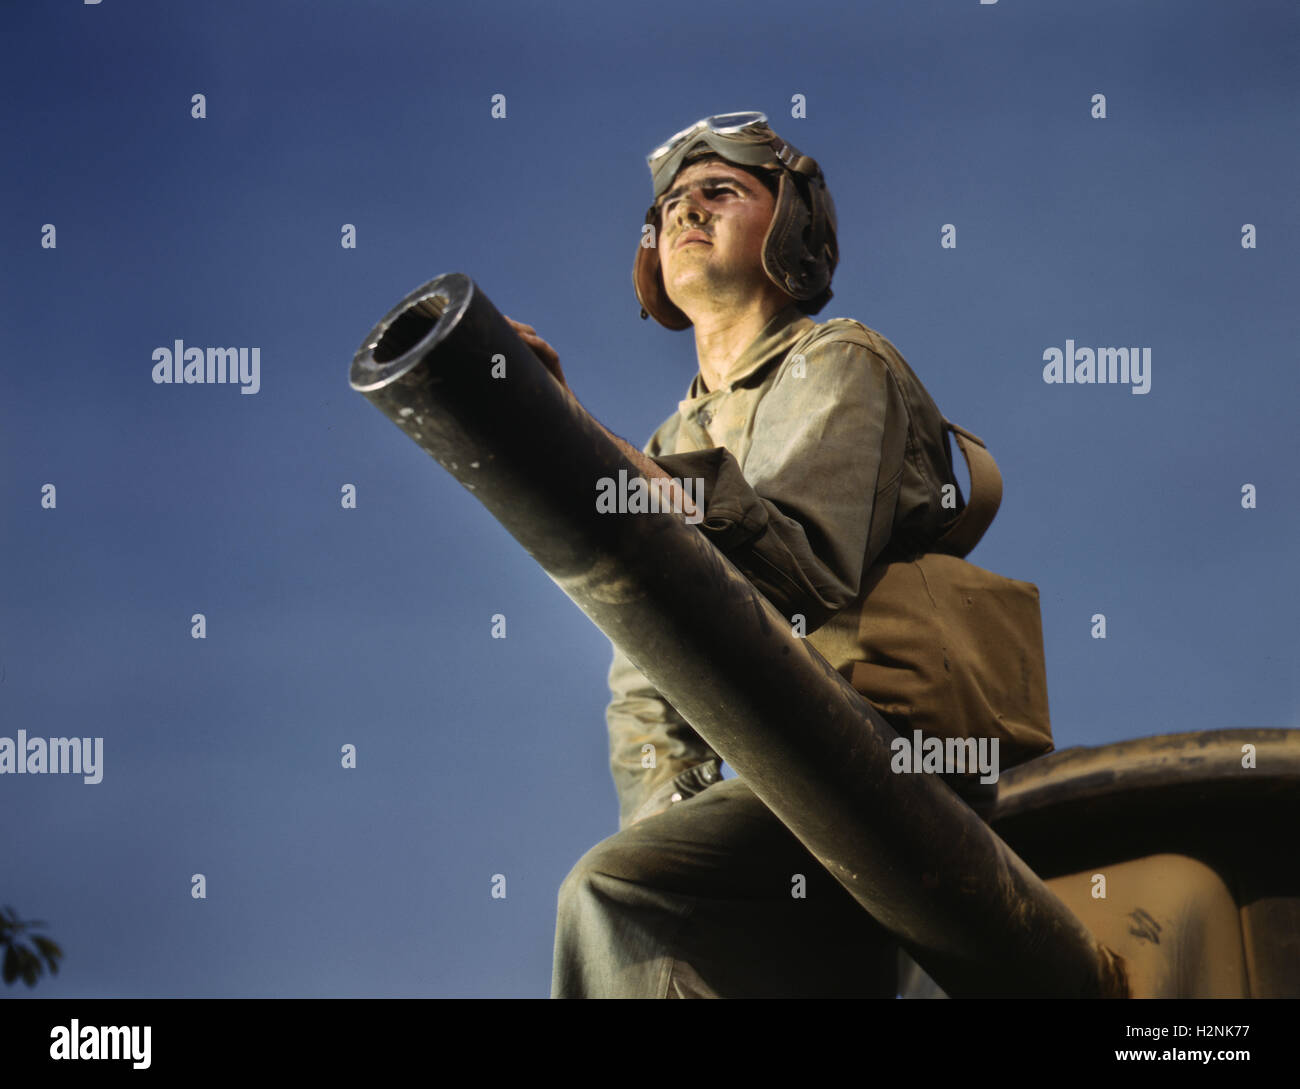 M-3 tank crewman, Fort Knox, Kentucky, USA, Alfred T. Palmer pour l'Office of War Information, Juin 1942 Banque D'Images